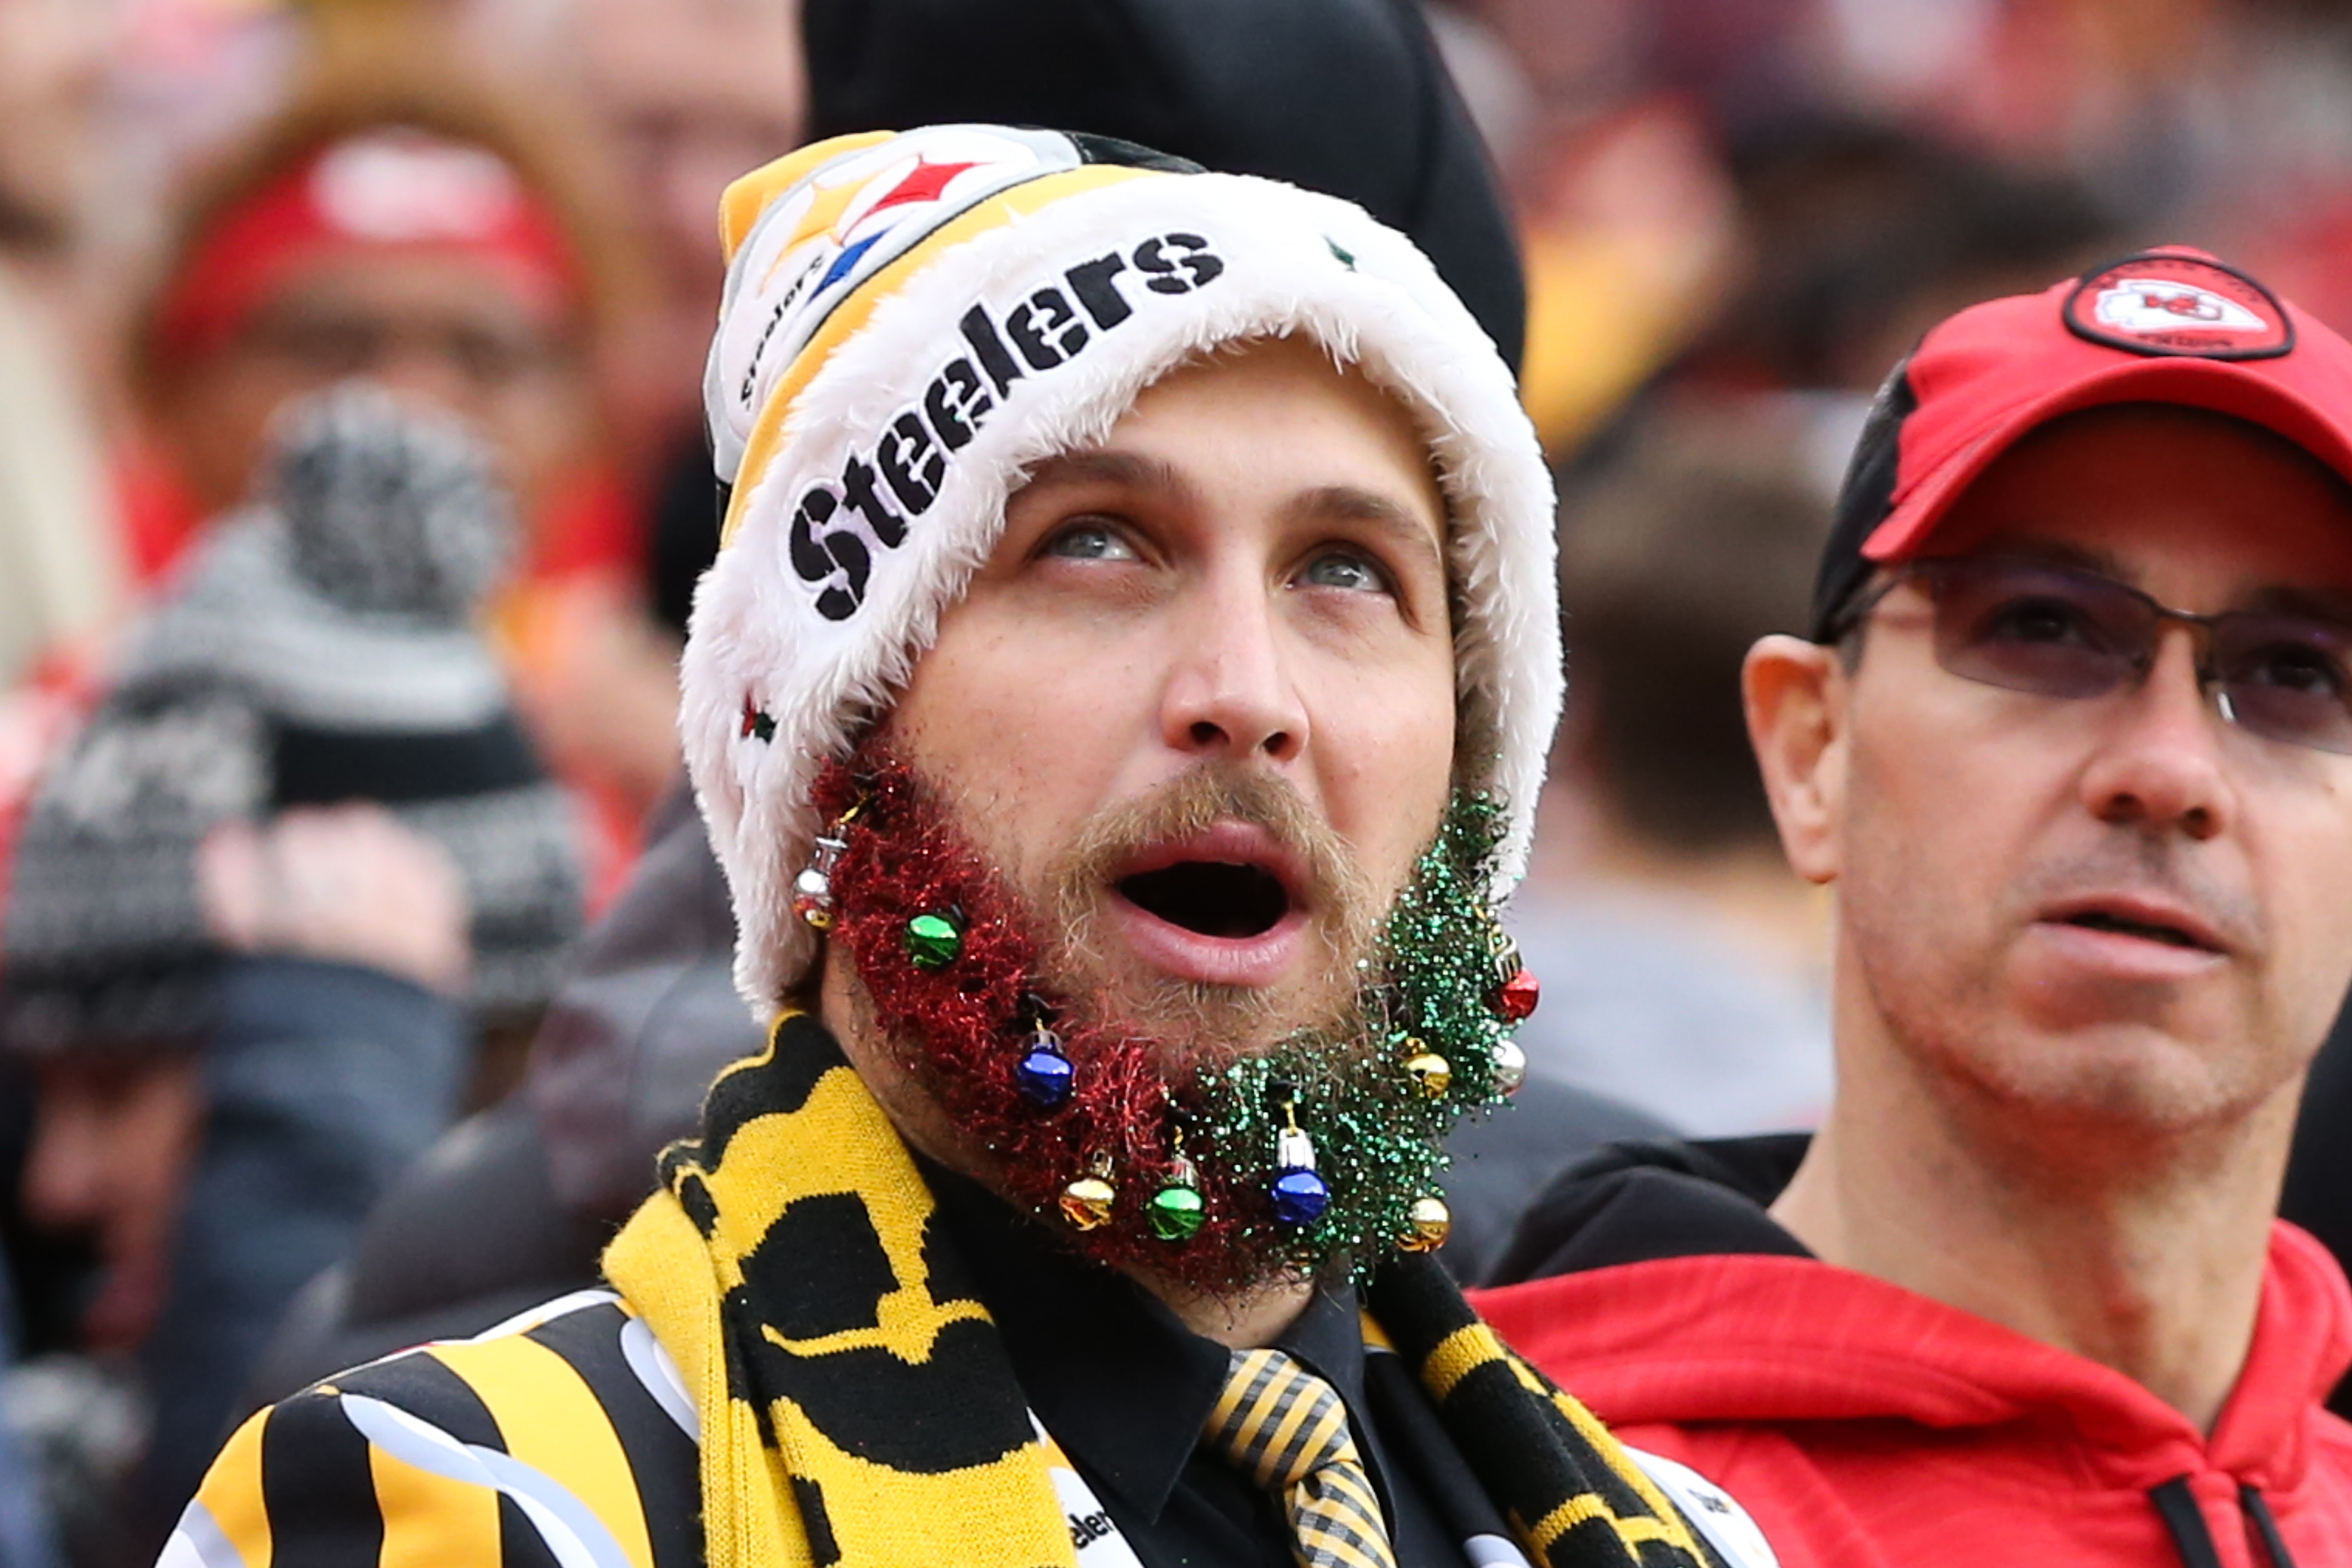 2022 NFL Schedule Features 3 Games on Christmas Day for 1st Time Ever